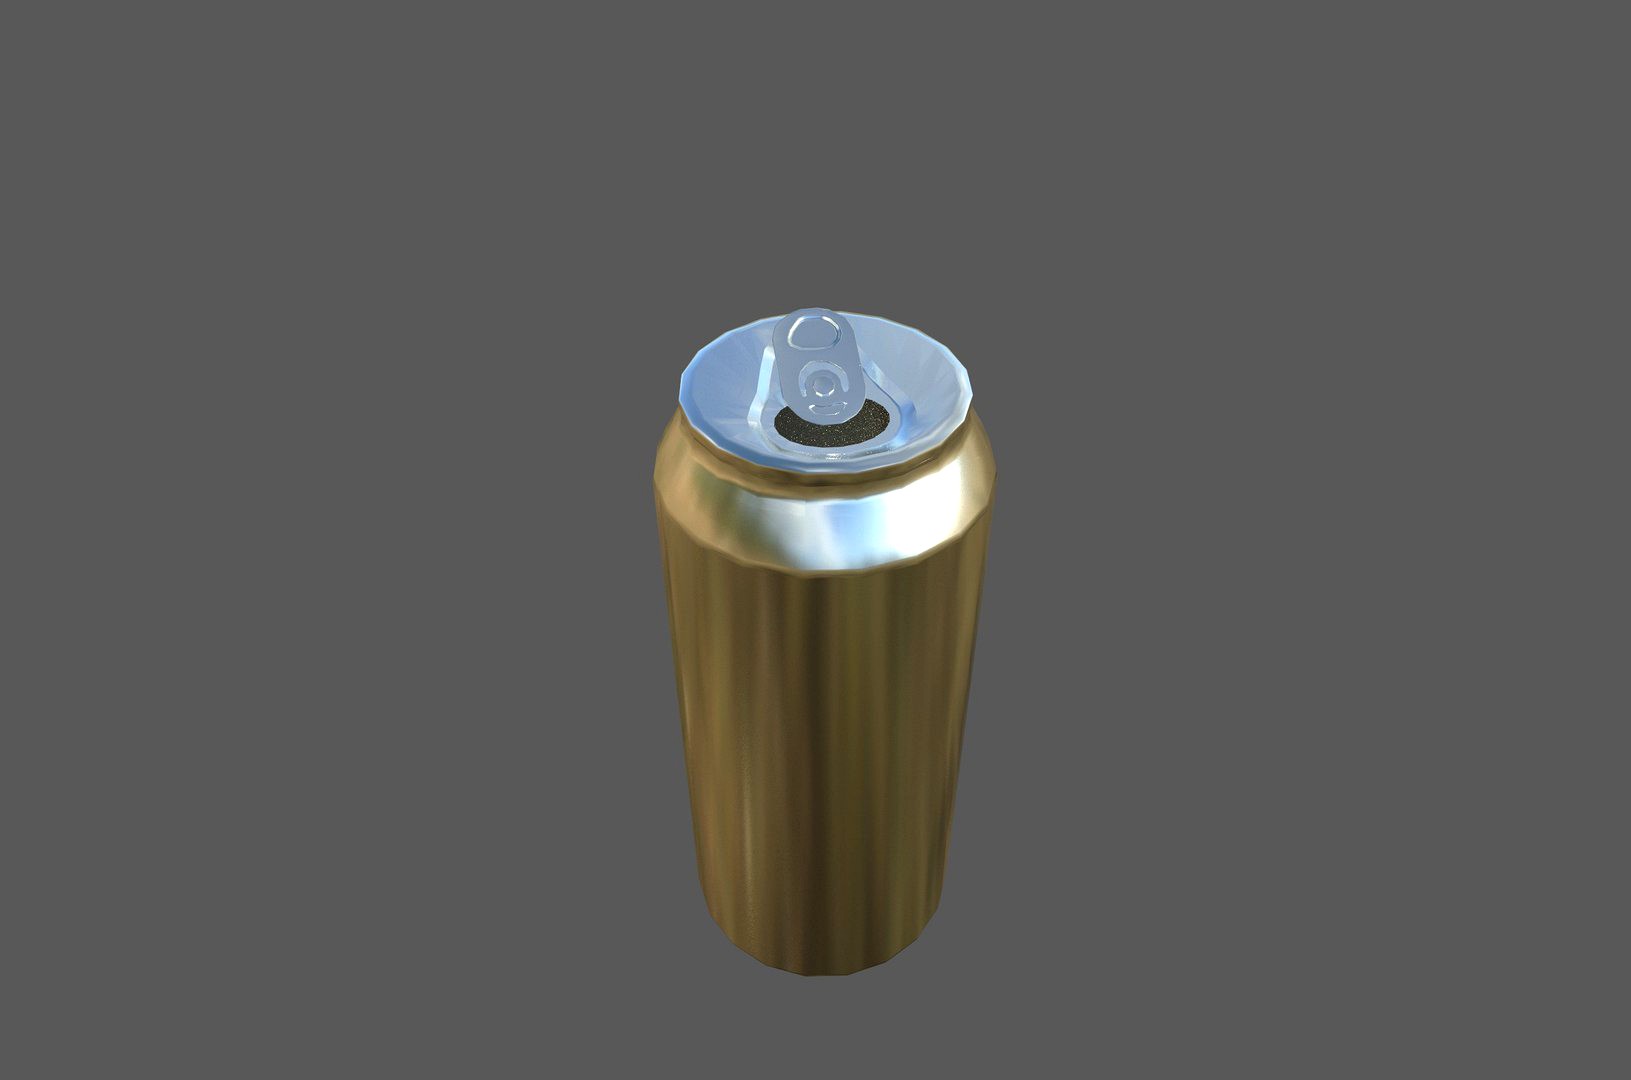 Can for soda